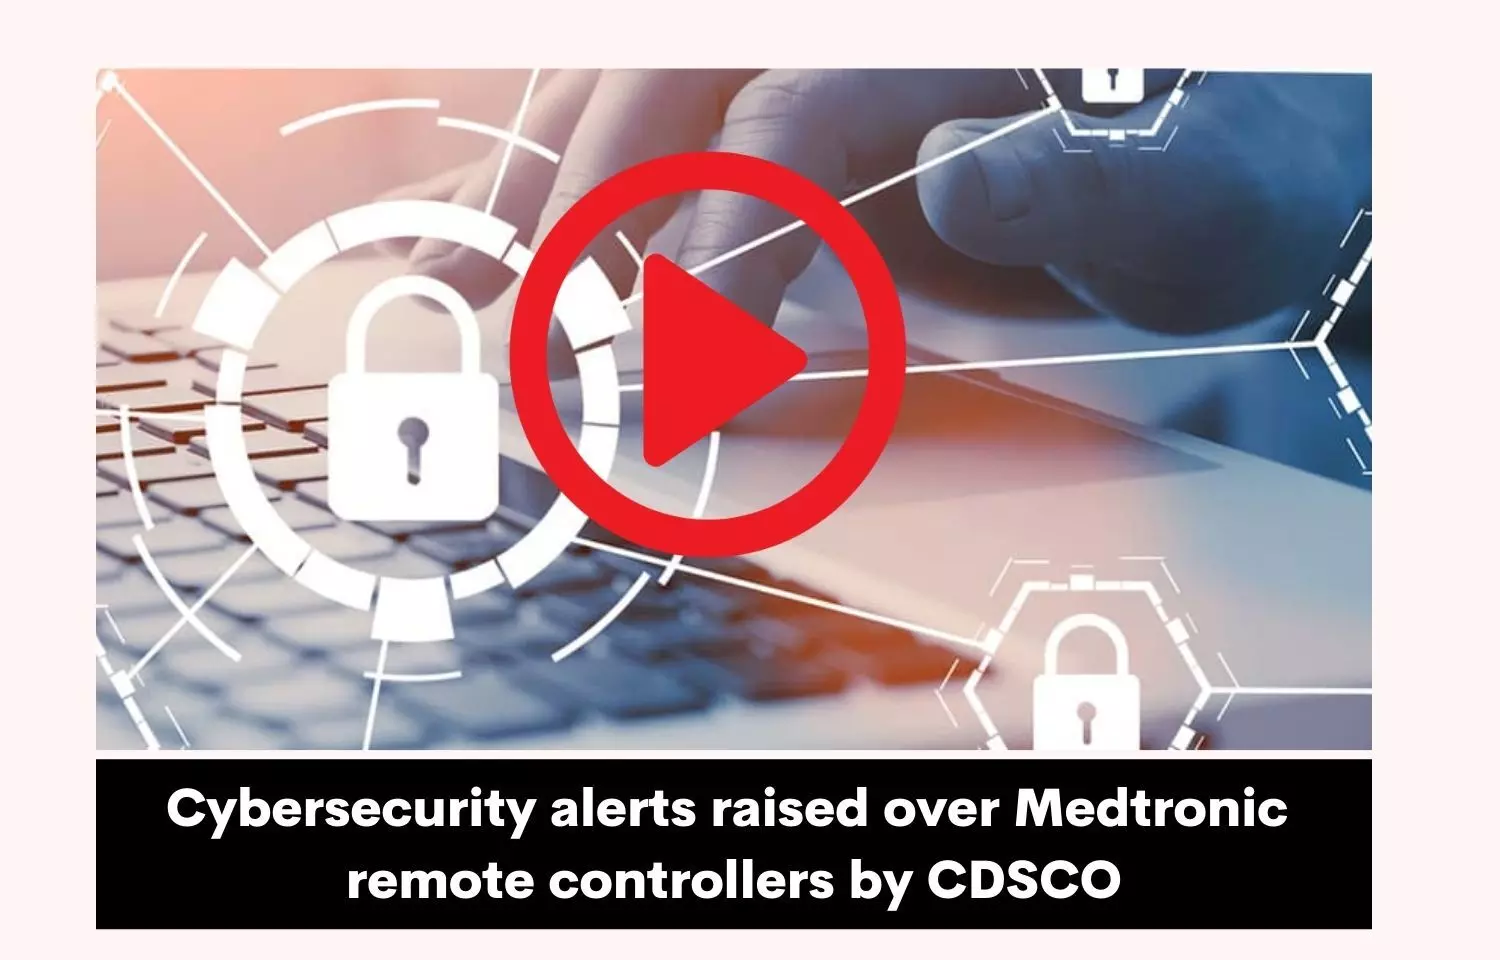 Cybersecurity alert raised over Medtronic remote controllers by CDSCO